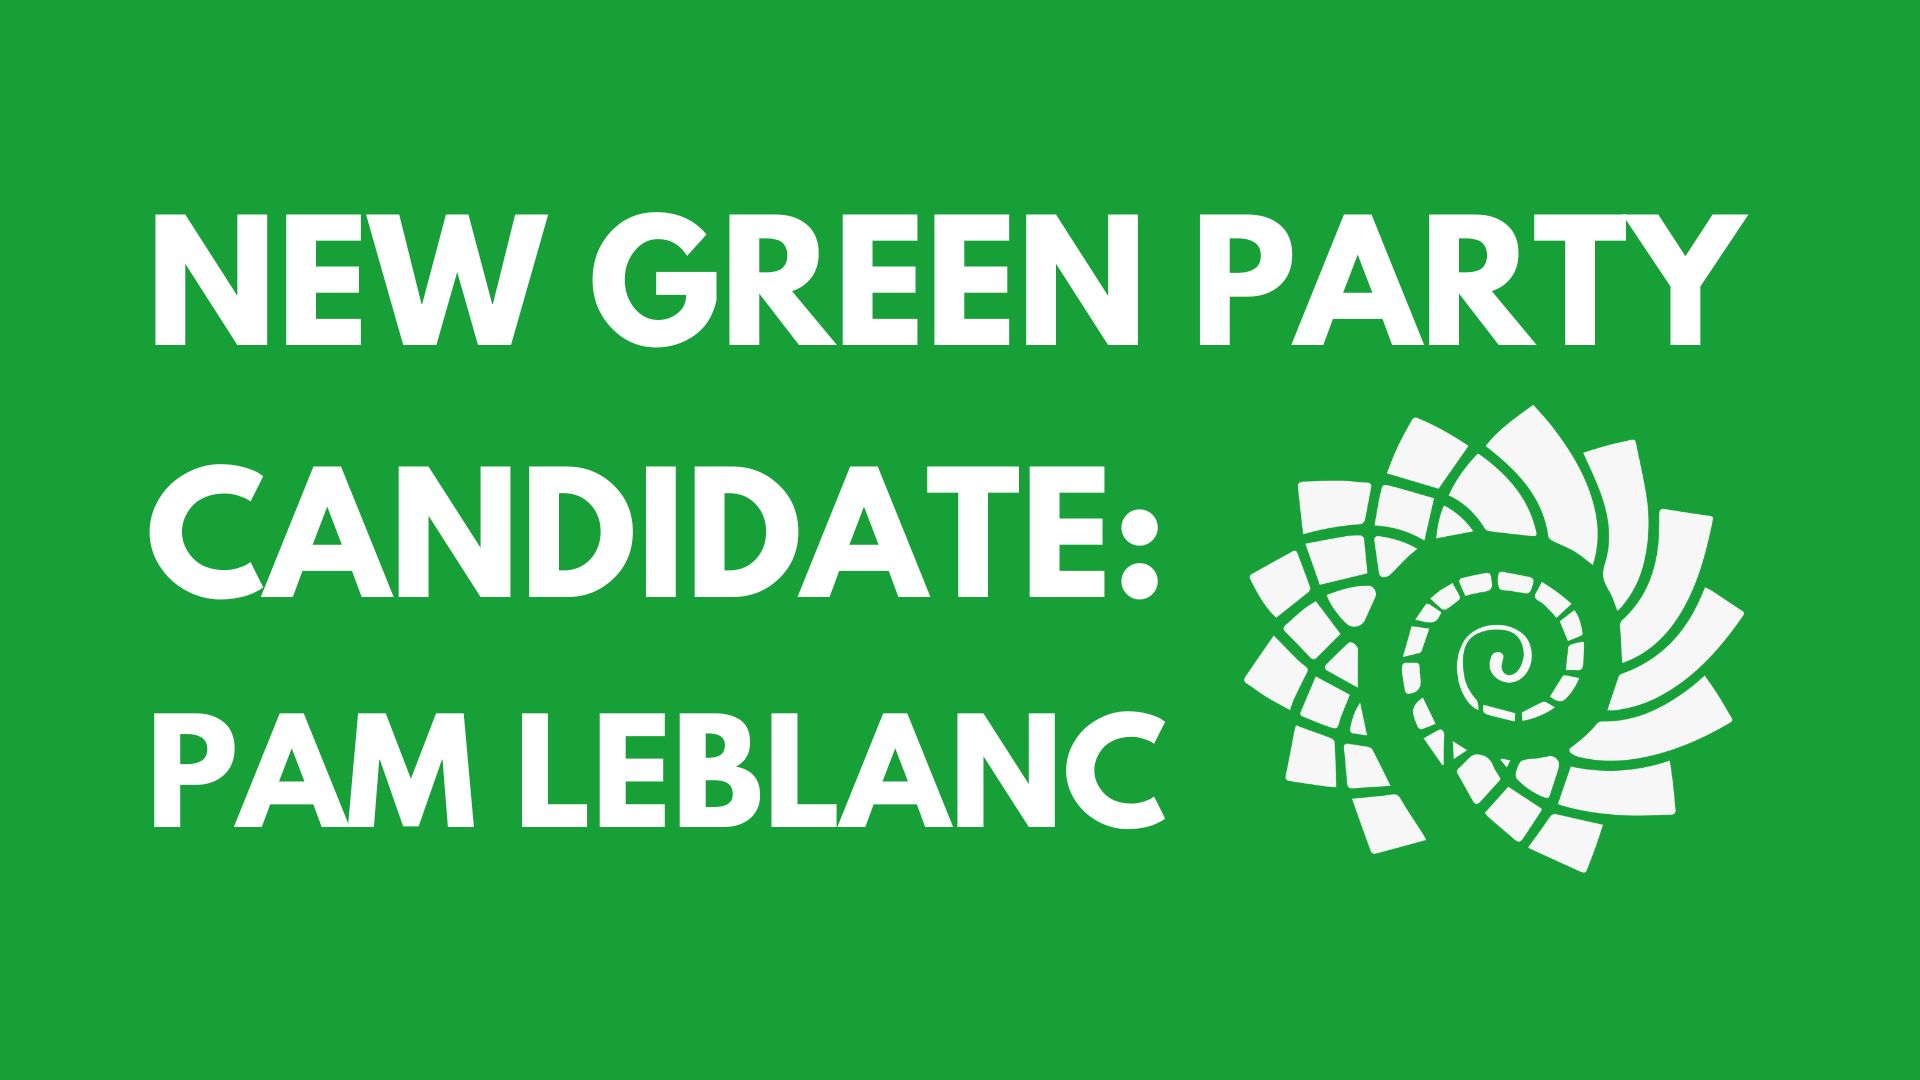 white text on green background, "NEW GREEN PARTY CANDIDATE: PAM LEBLANC" next to fiddlehead spiral in geometric spiral